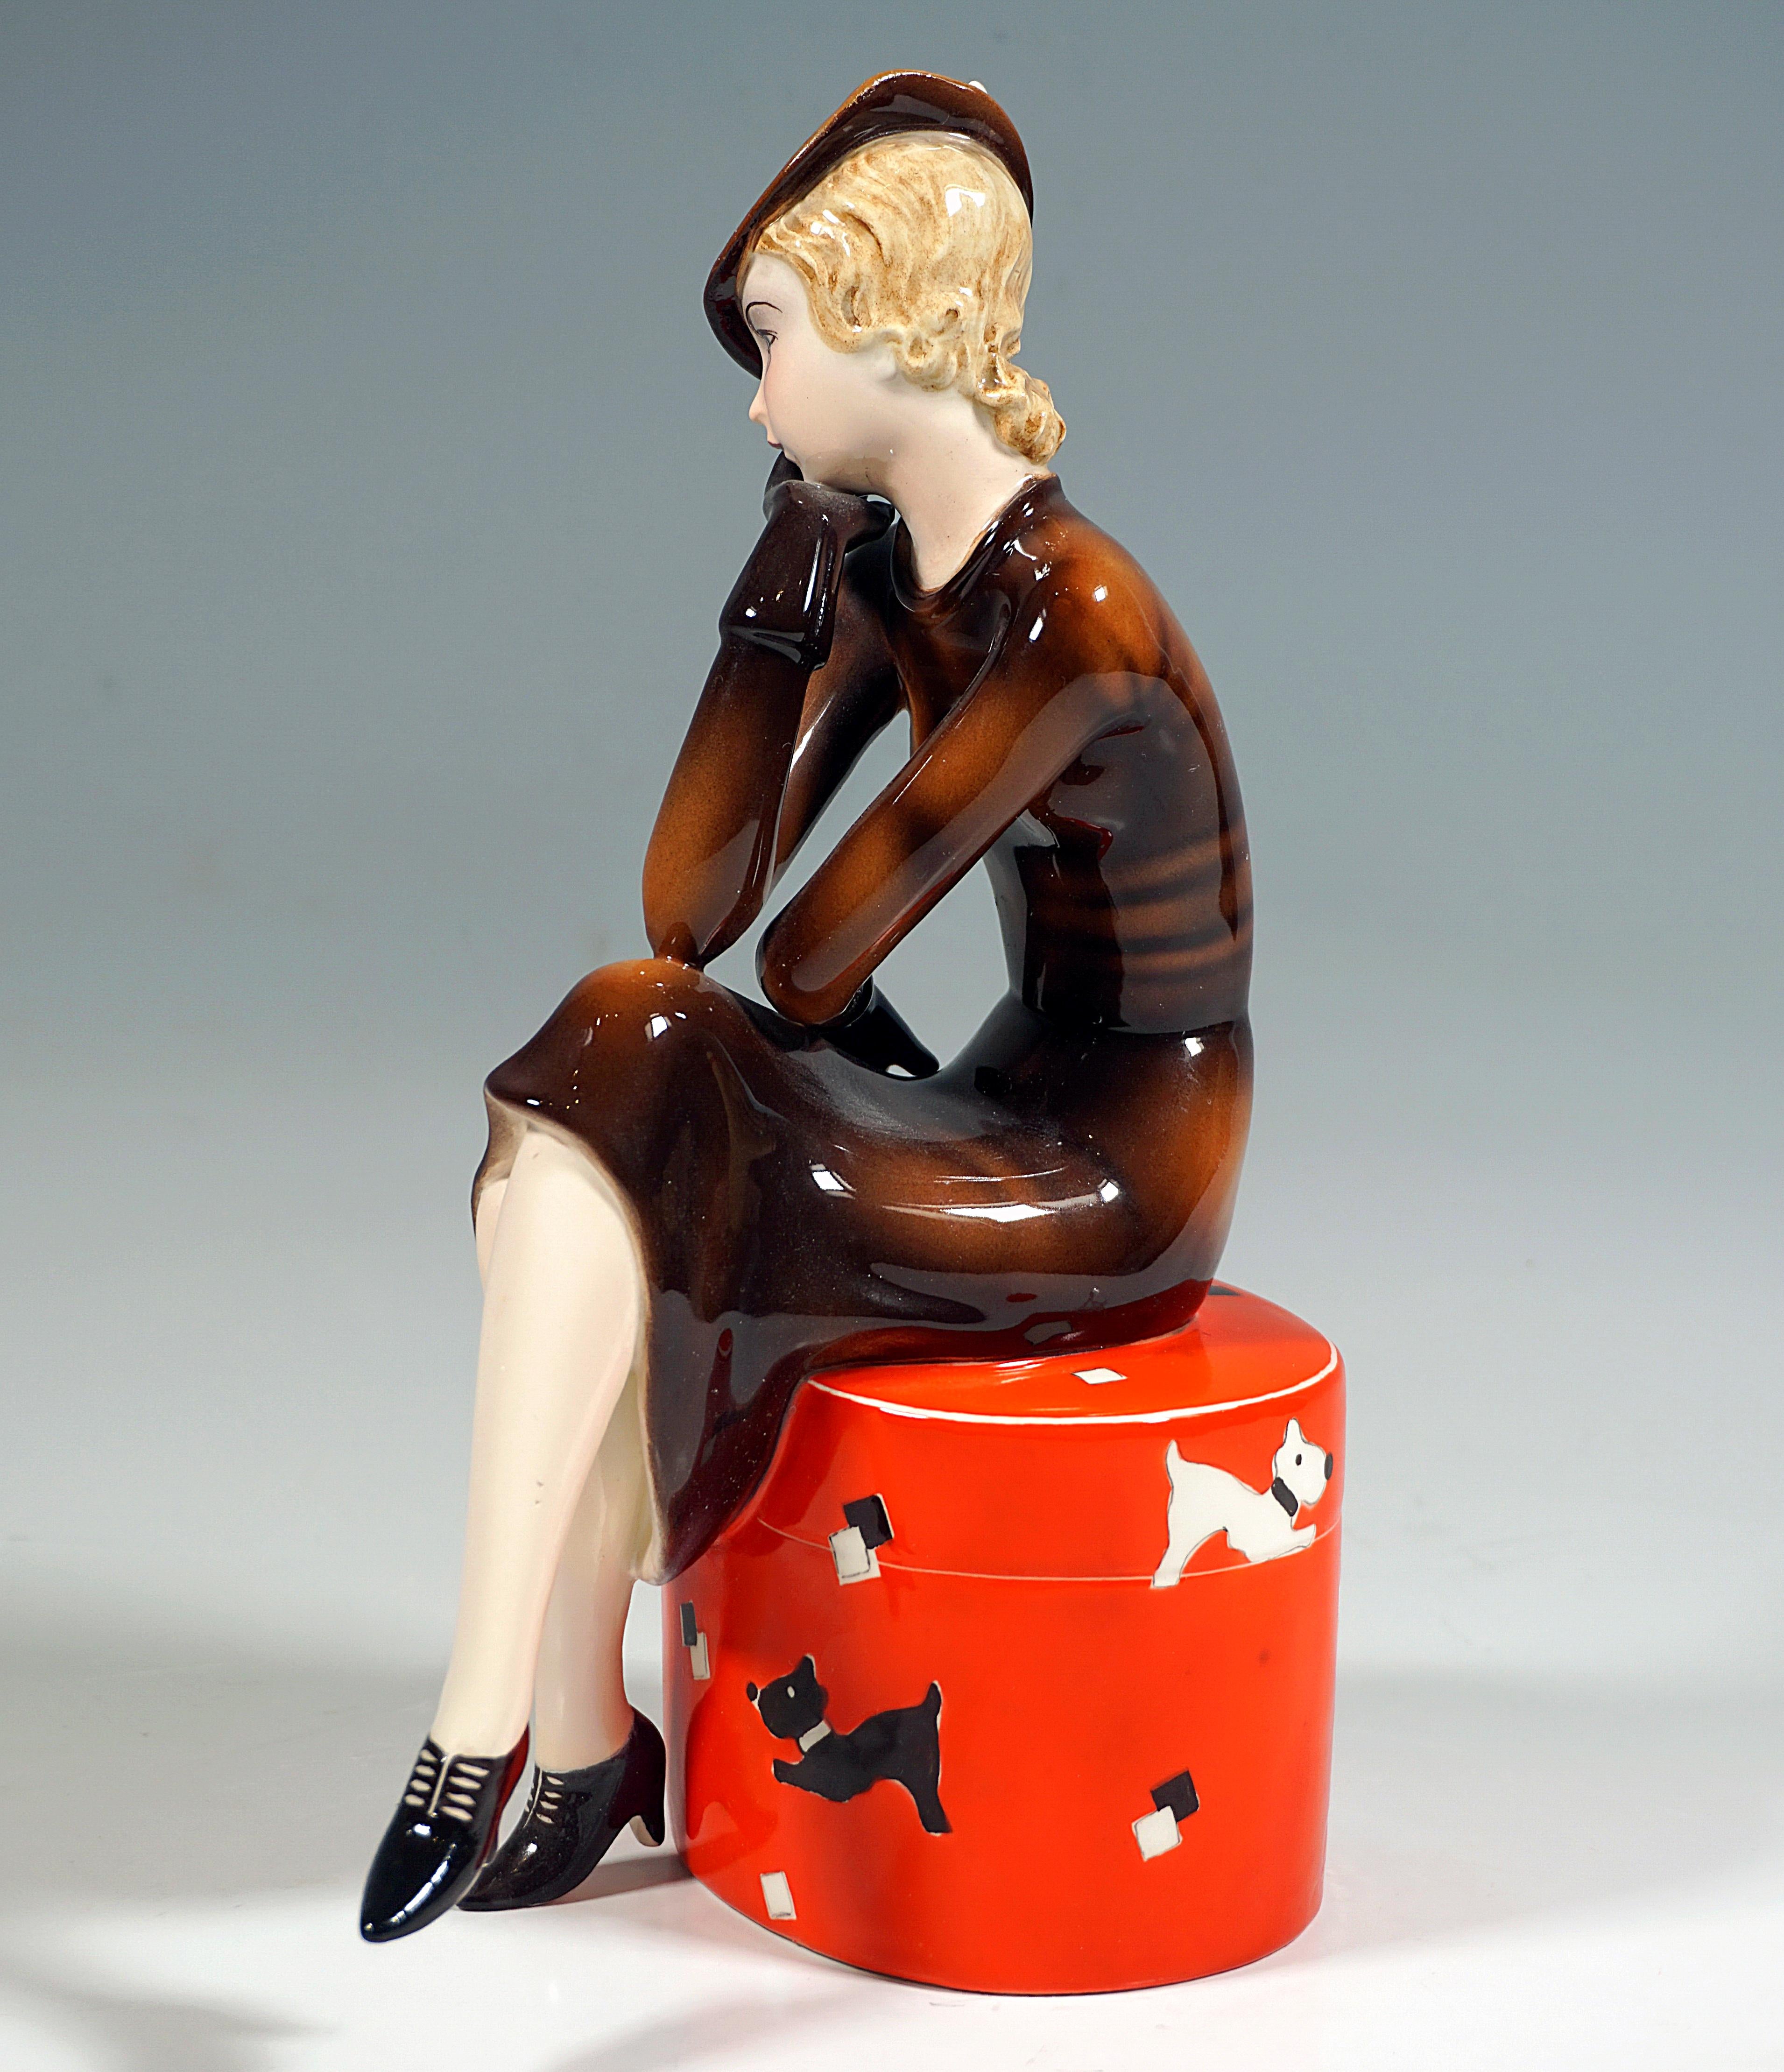 Very rare Goldscheider Art Deco ceramic figurine:
A young lady with blond curly hair in an elegant, brown suit with a matching hat and gloves sitting on a large, red, round box with black and white dog decorations, with crossed legs, her head